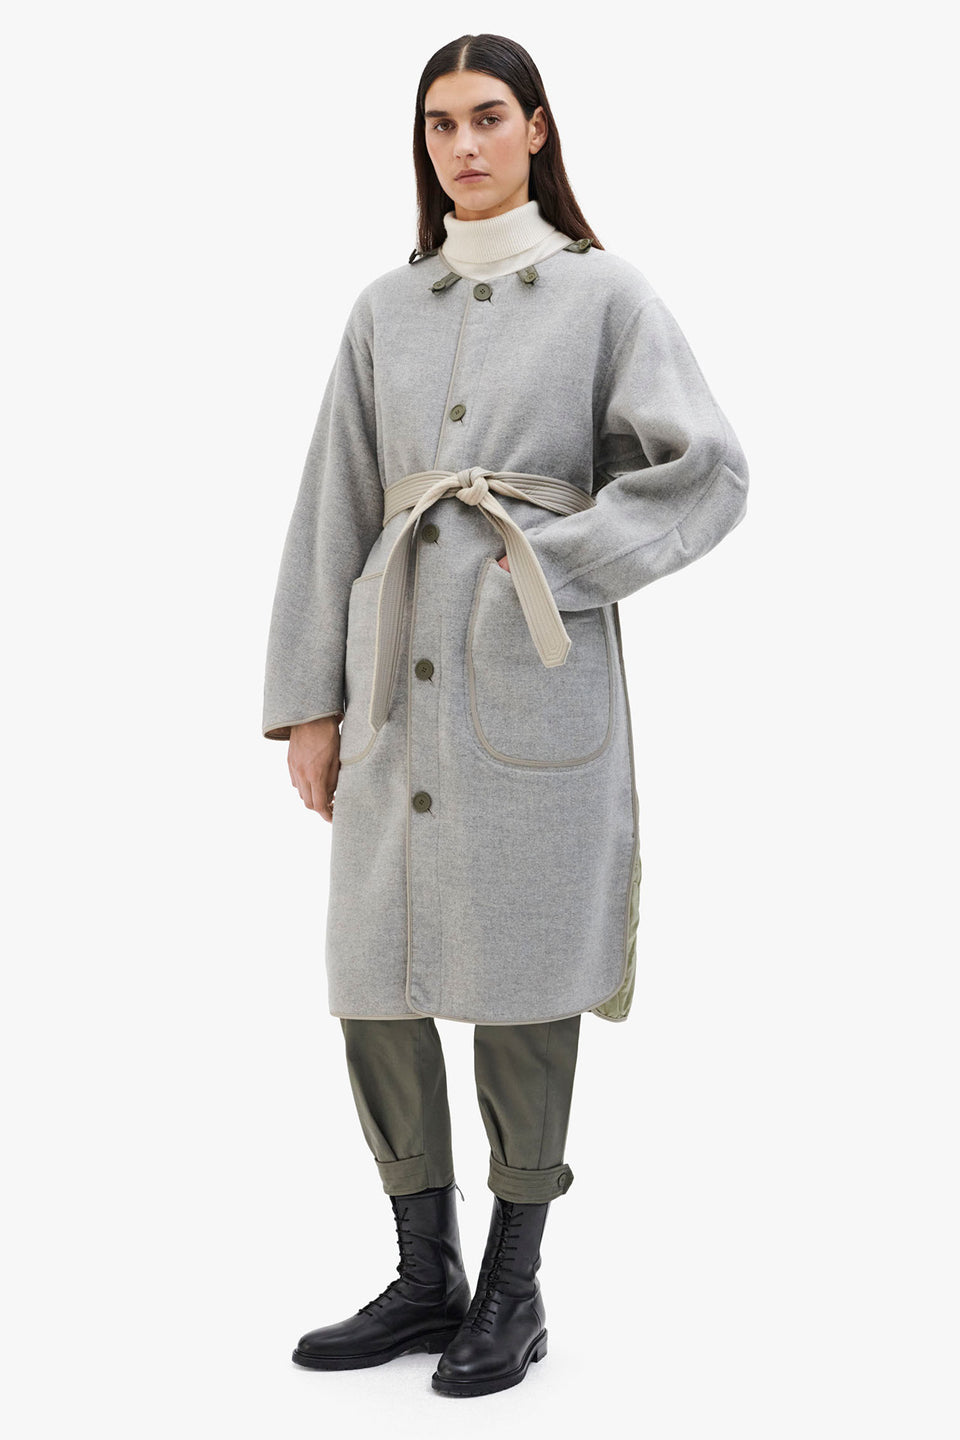 Wool Quilt Parka - Taupe / Pale Grey (listing page thumbnail)